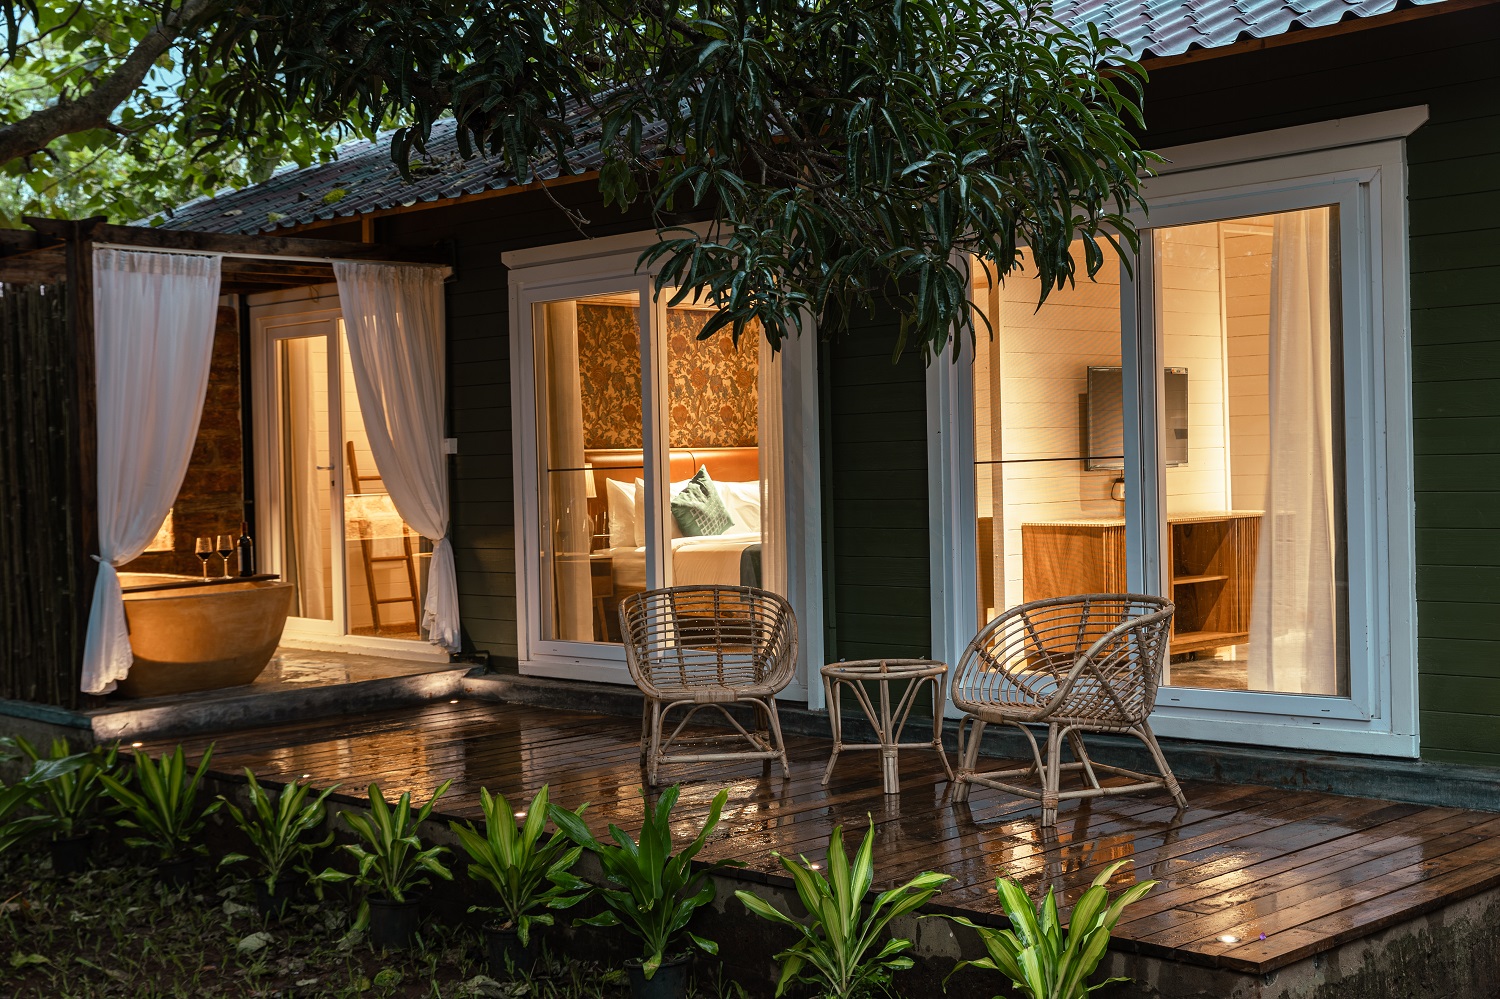 Larisa Hotels & Resorts expand their footprint with second property in Goa